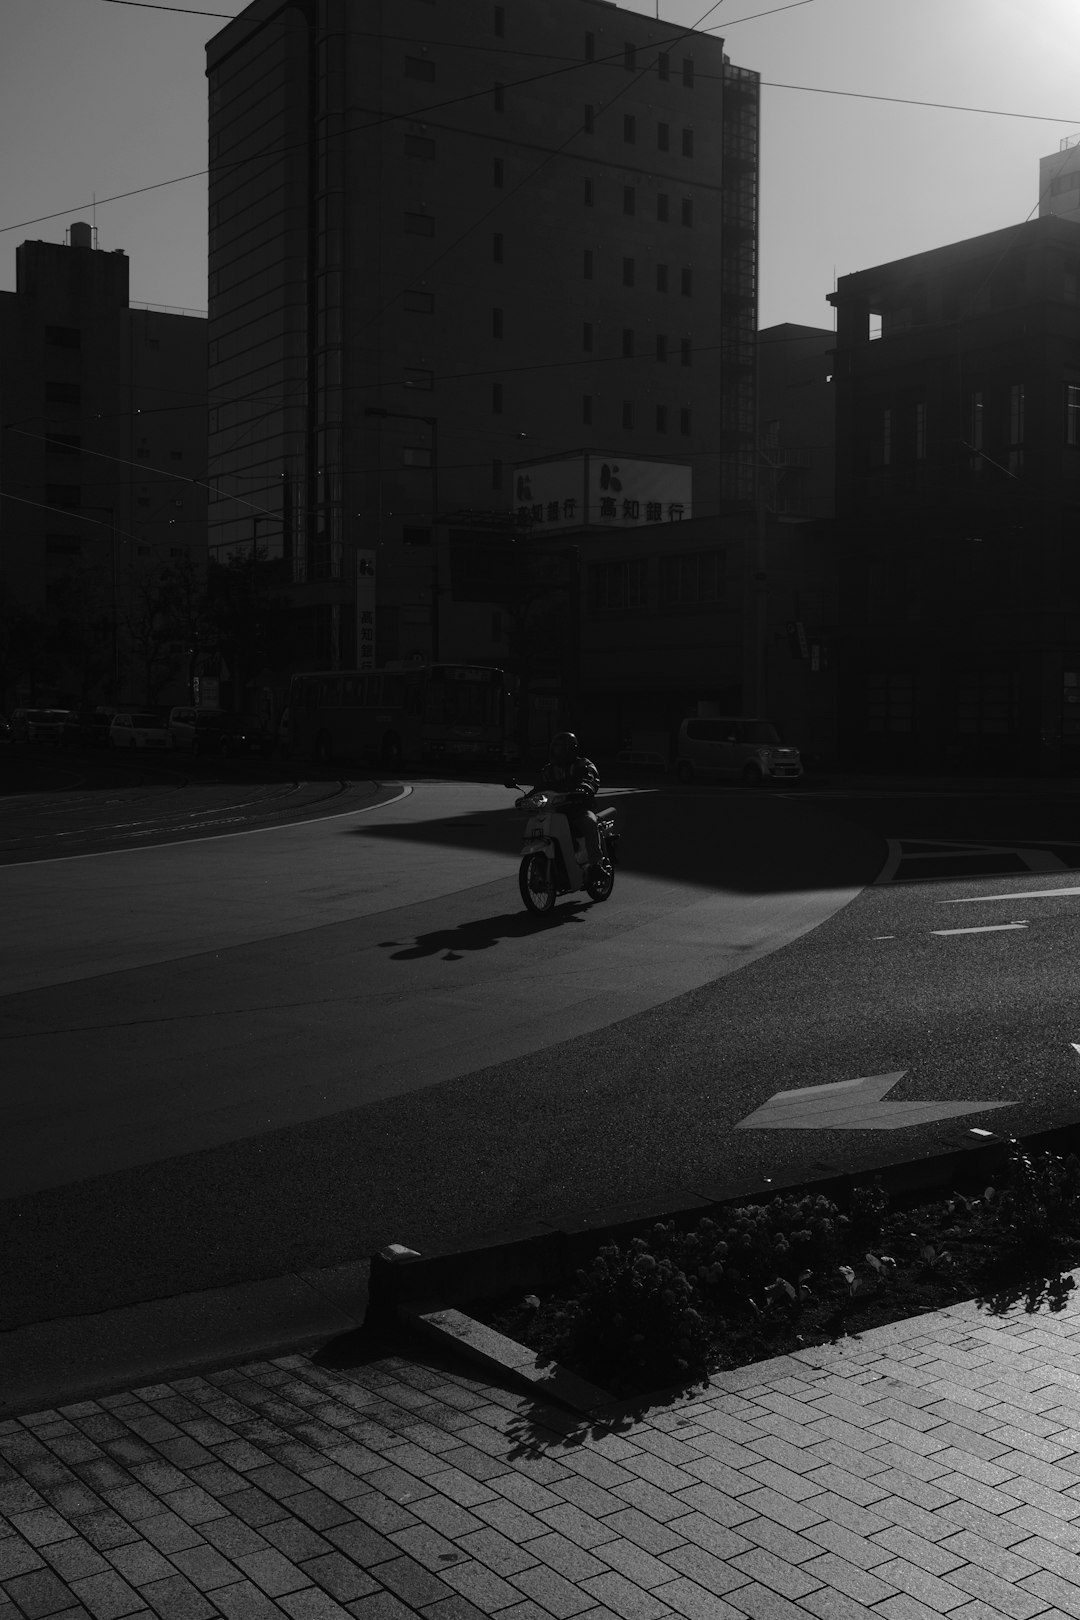 grayscale photo of man riding motorcycle on road